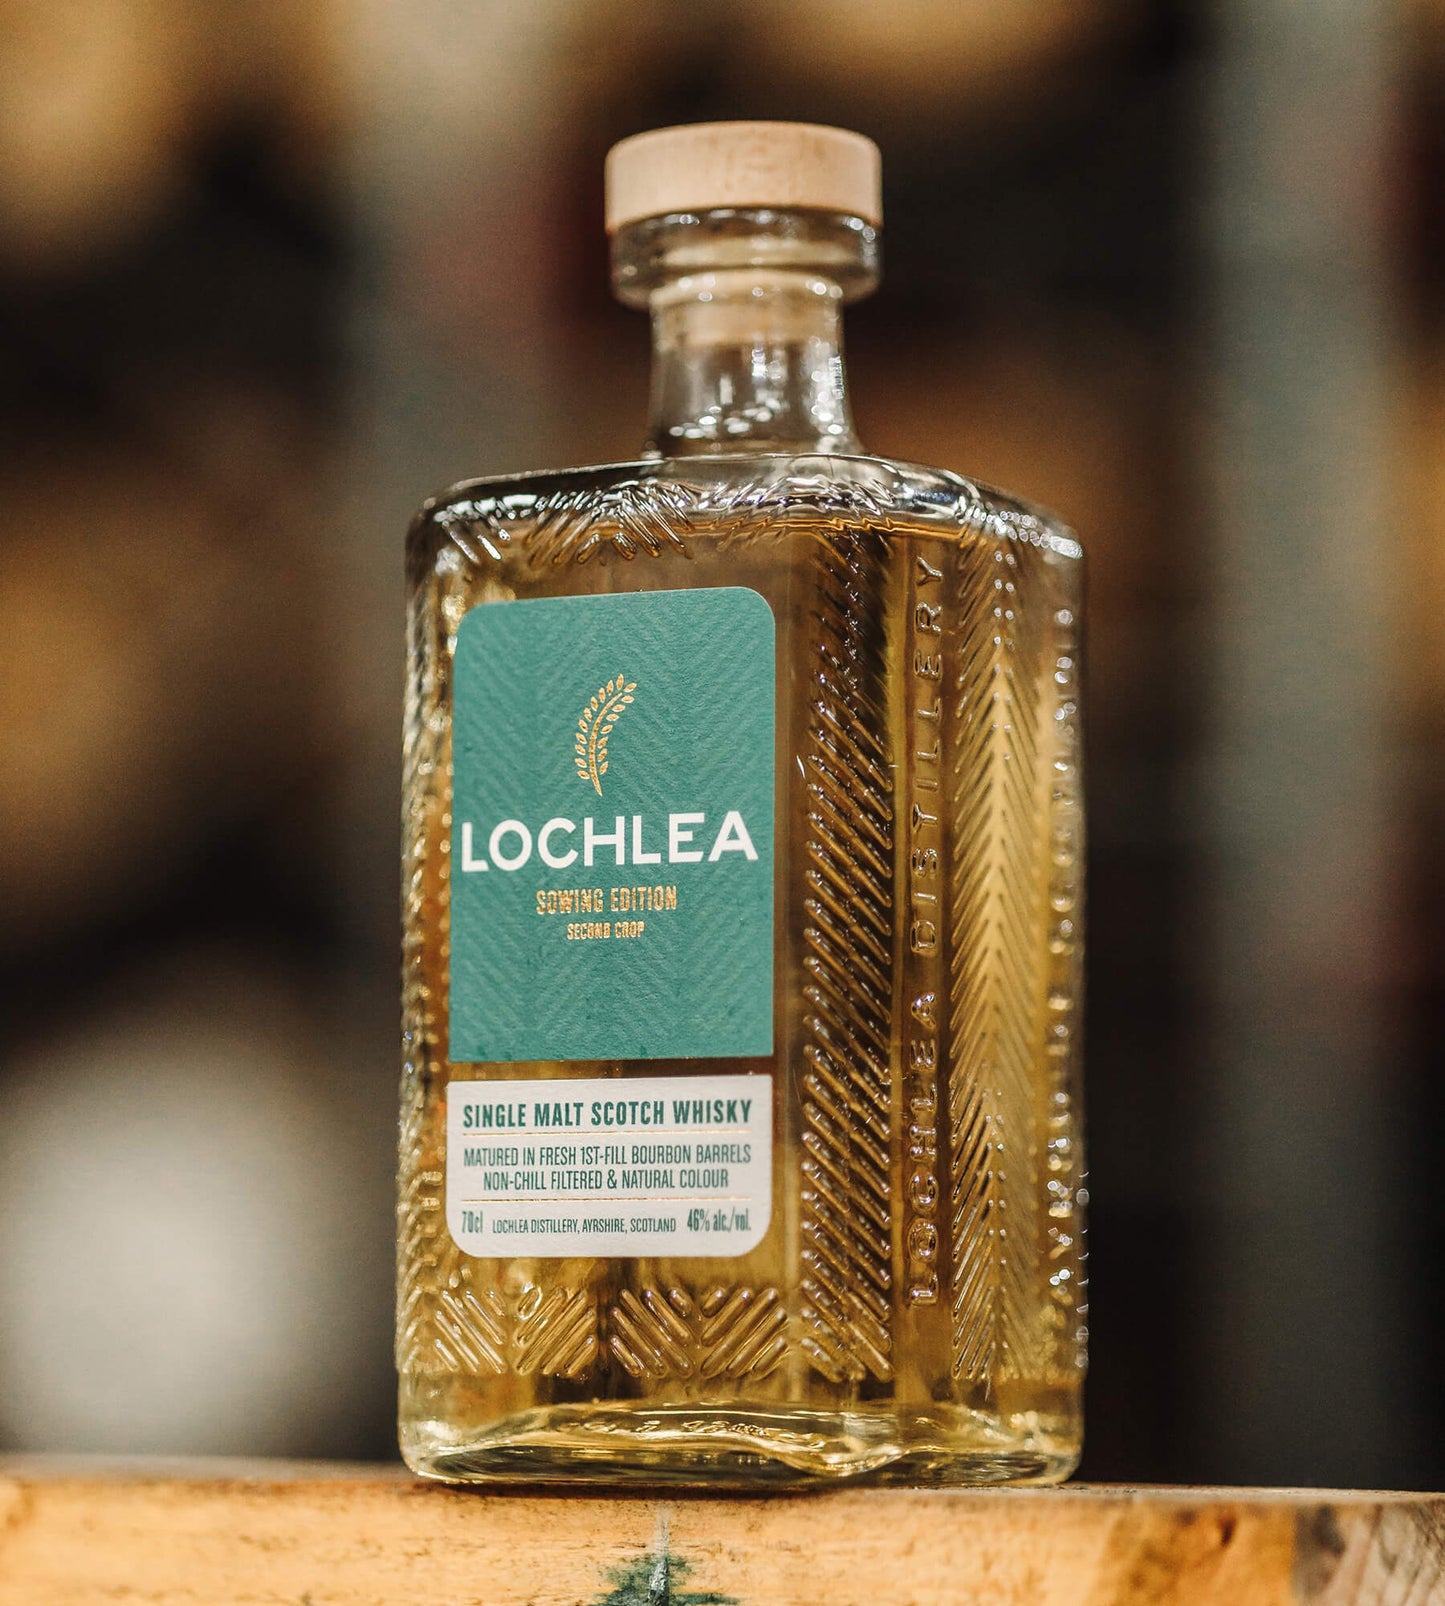 Lochlea Single Malt Scotch Whisky • Sowing Edition 2nd Crop